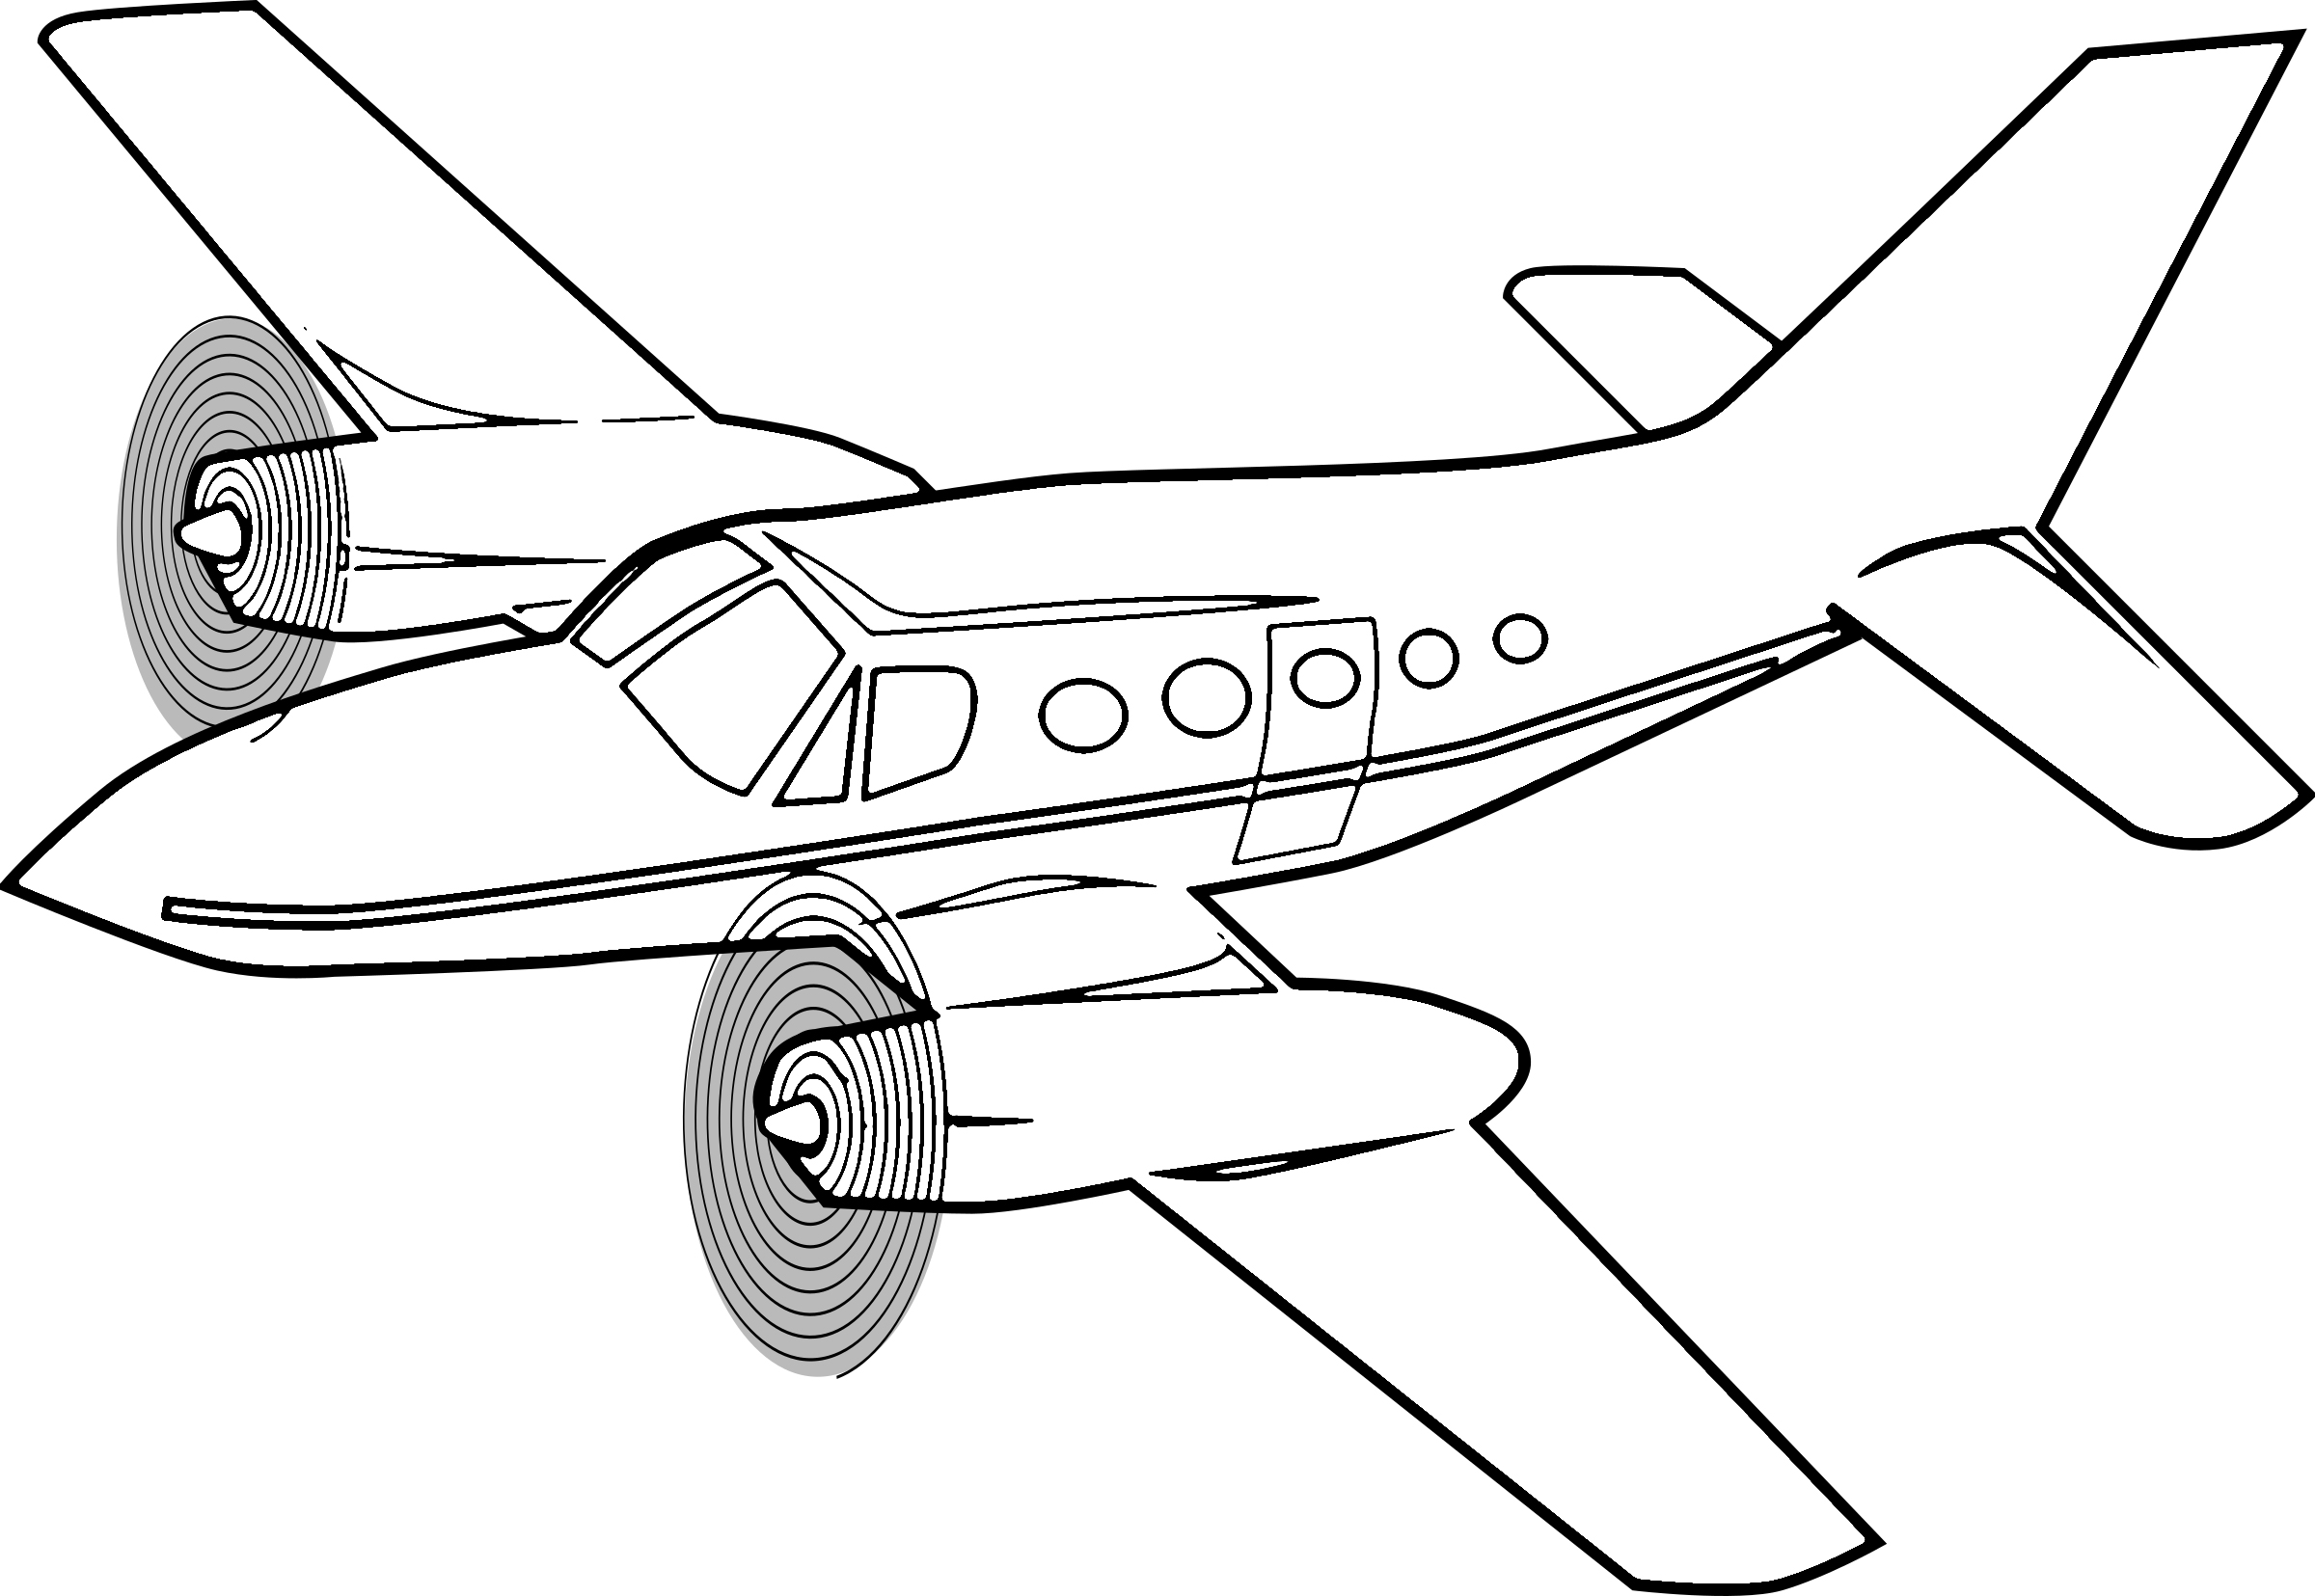 Propeller airplane coloring page